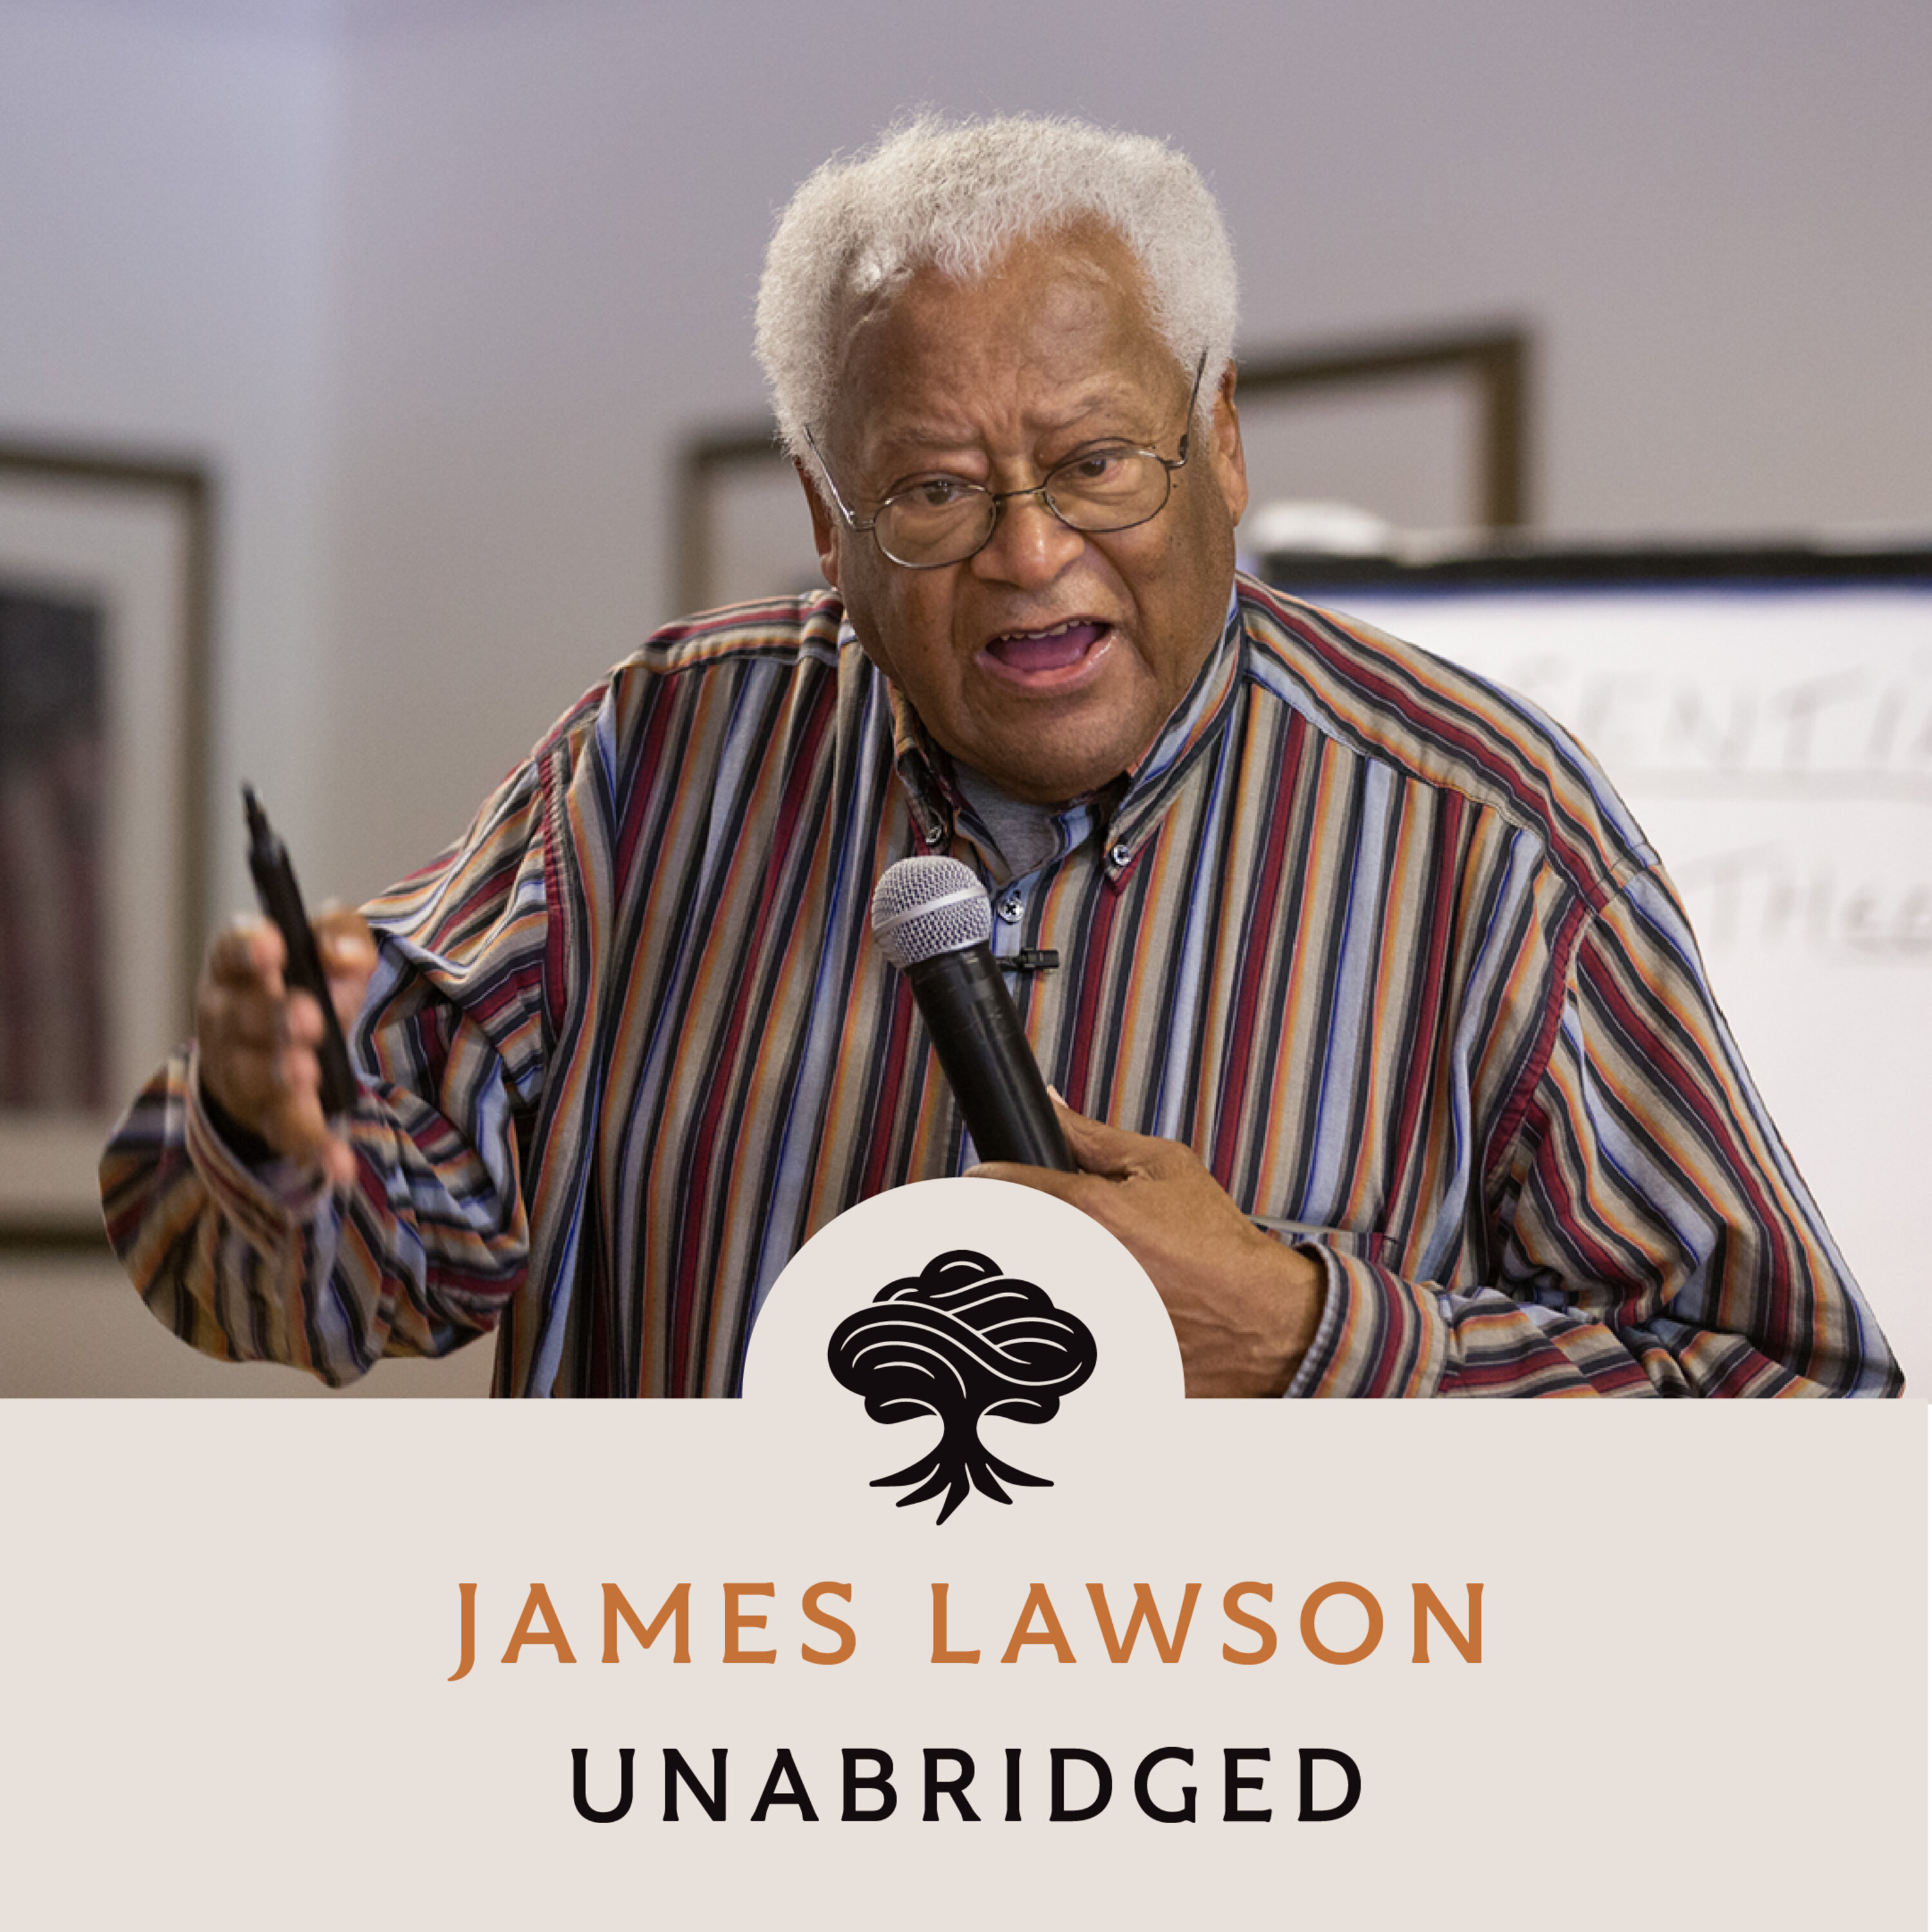 Thumbnail for "95: Unabridged Interview: James Lawson".